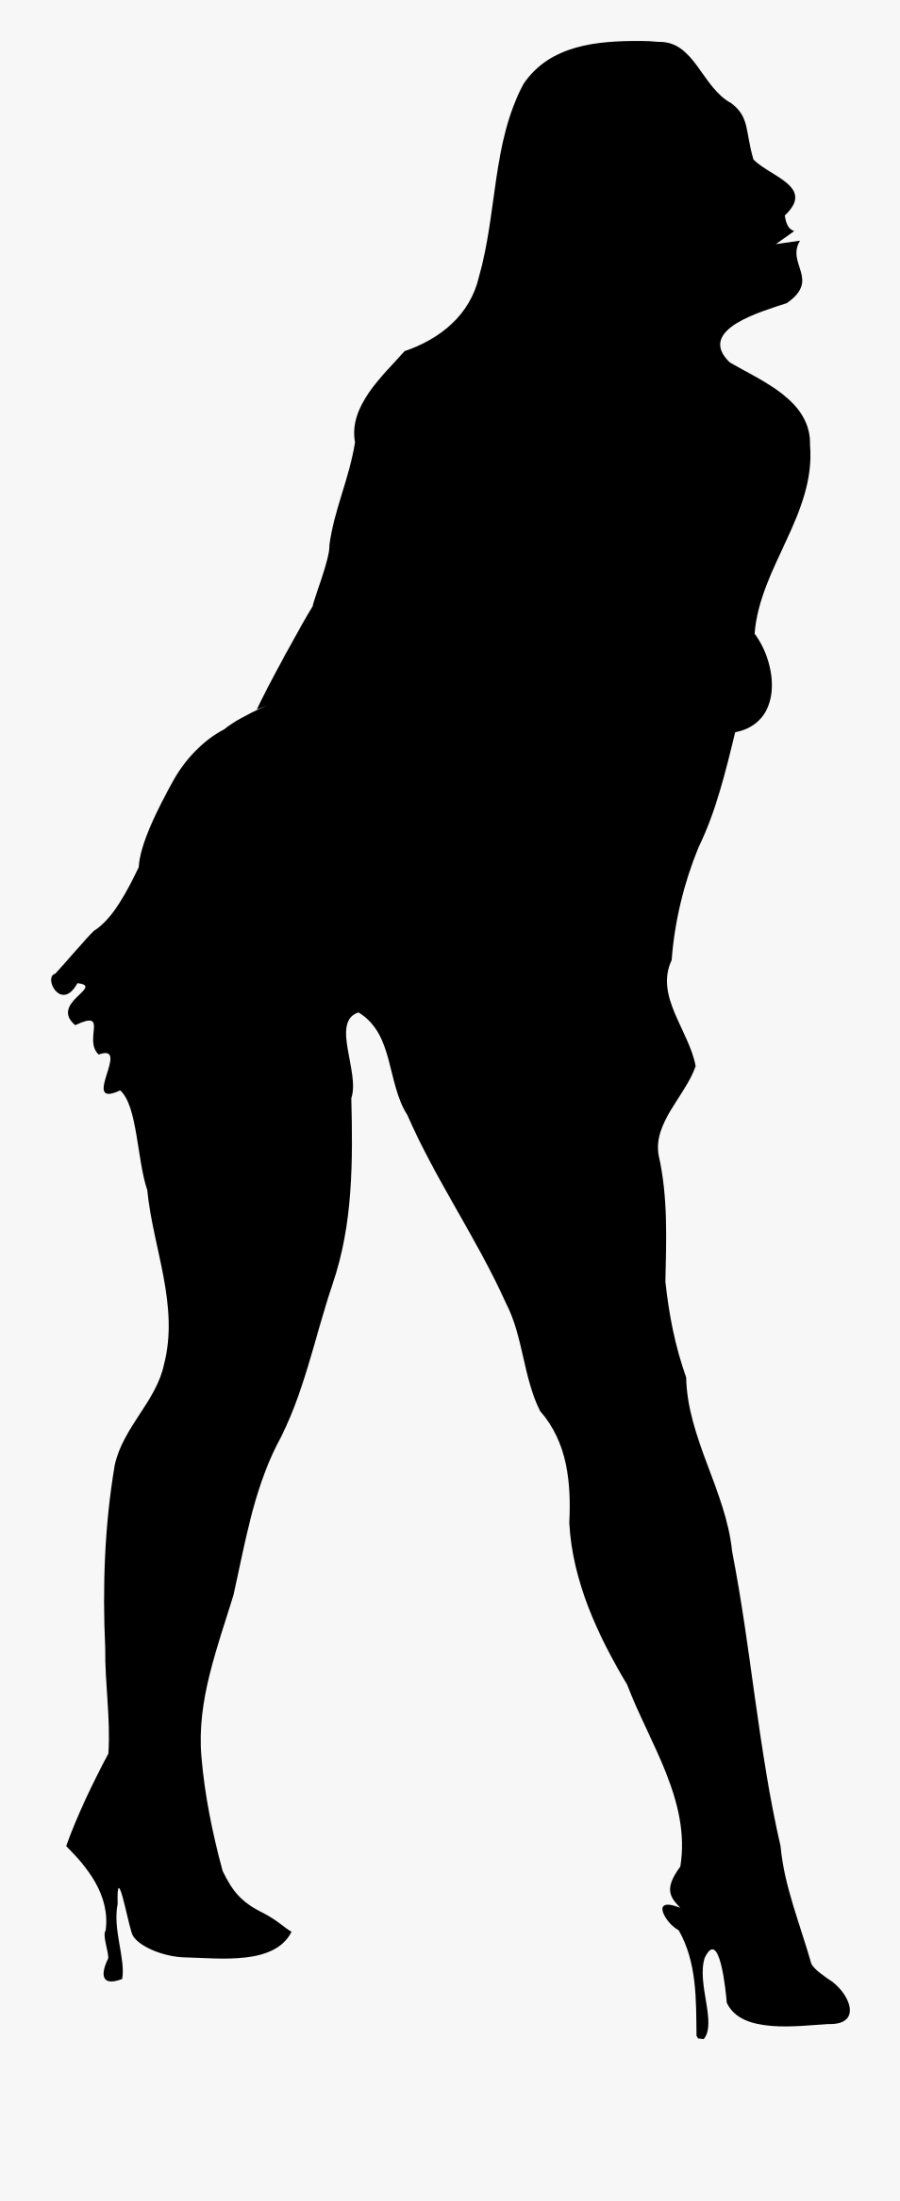 Woman Silhouette 56 - Hands On Hips Girl Silhouette Transparent, Transparent Clipart